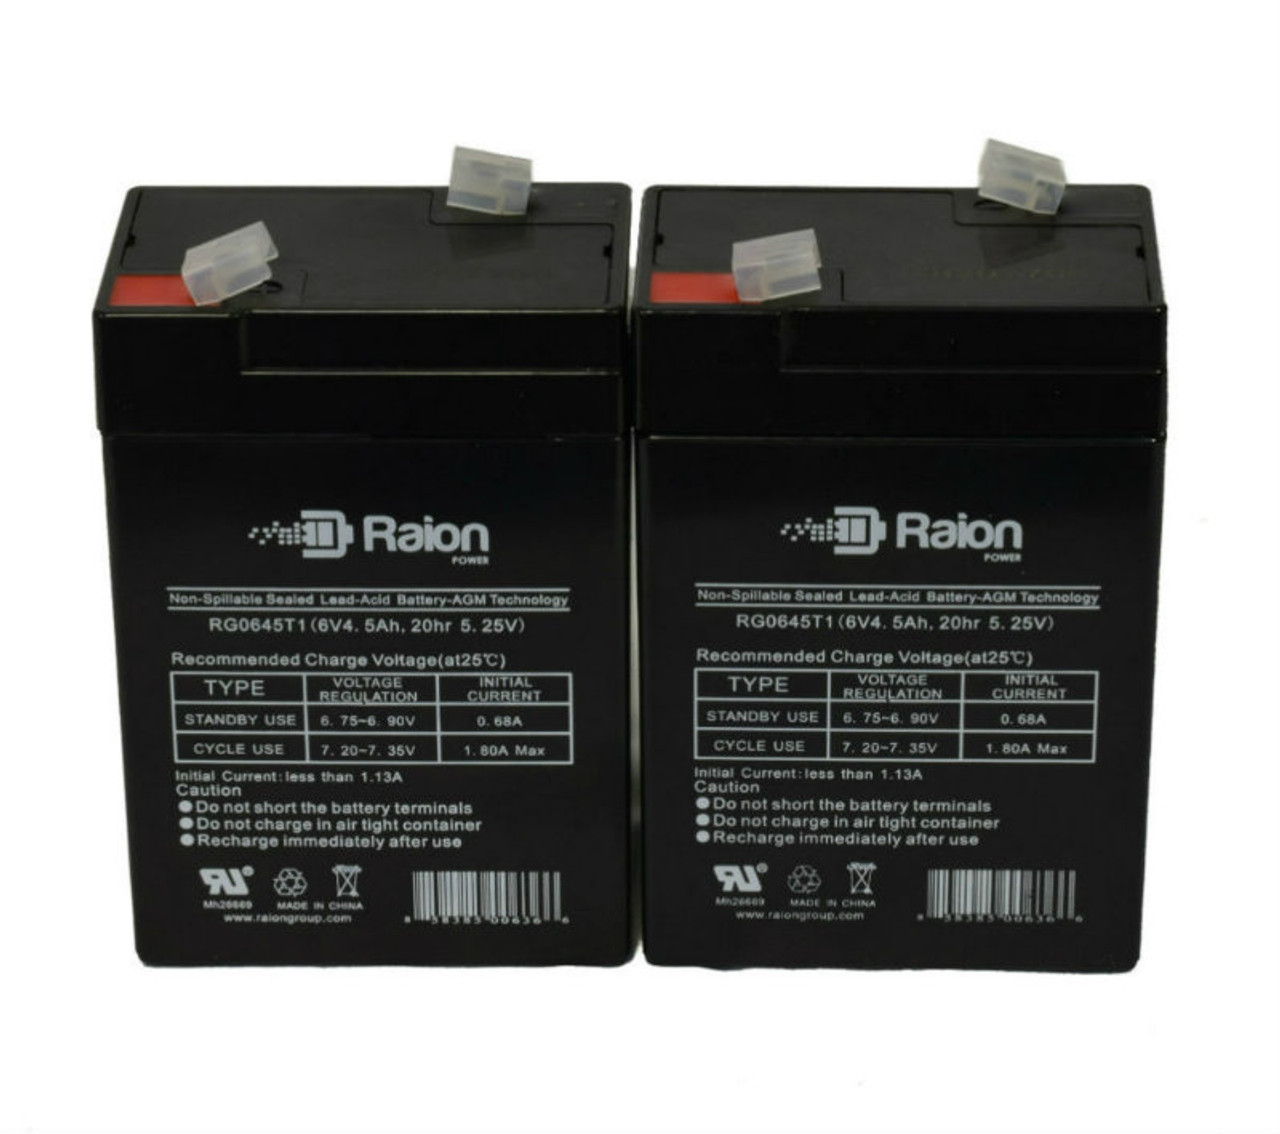 Raion Power 6 Volt 4.5Ah RG0645T1 Replacement Battery for XYC XT655 - 2 Pack